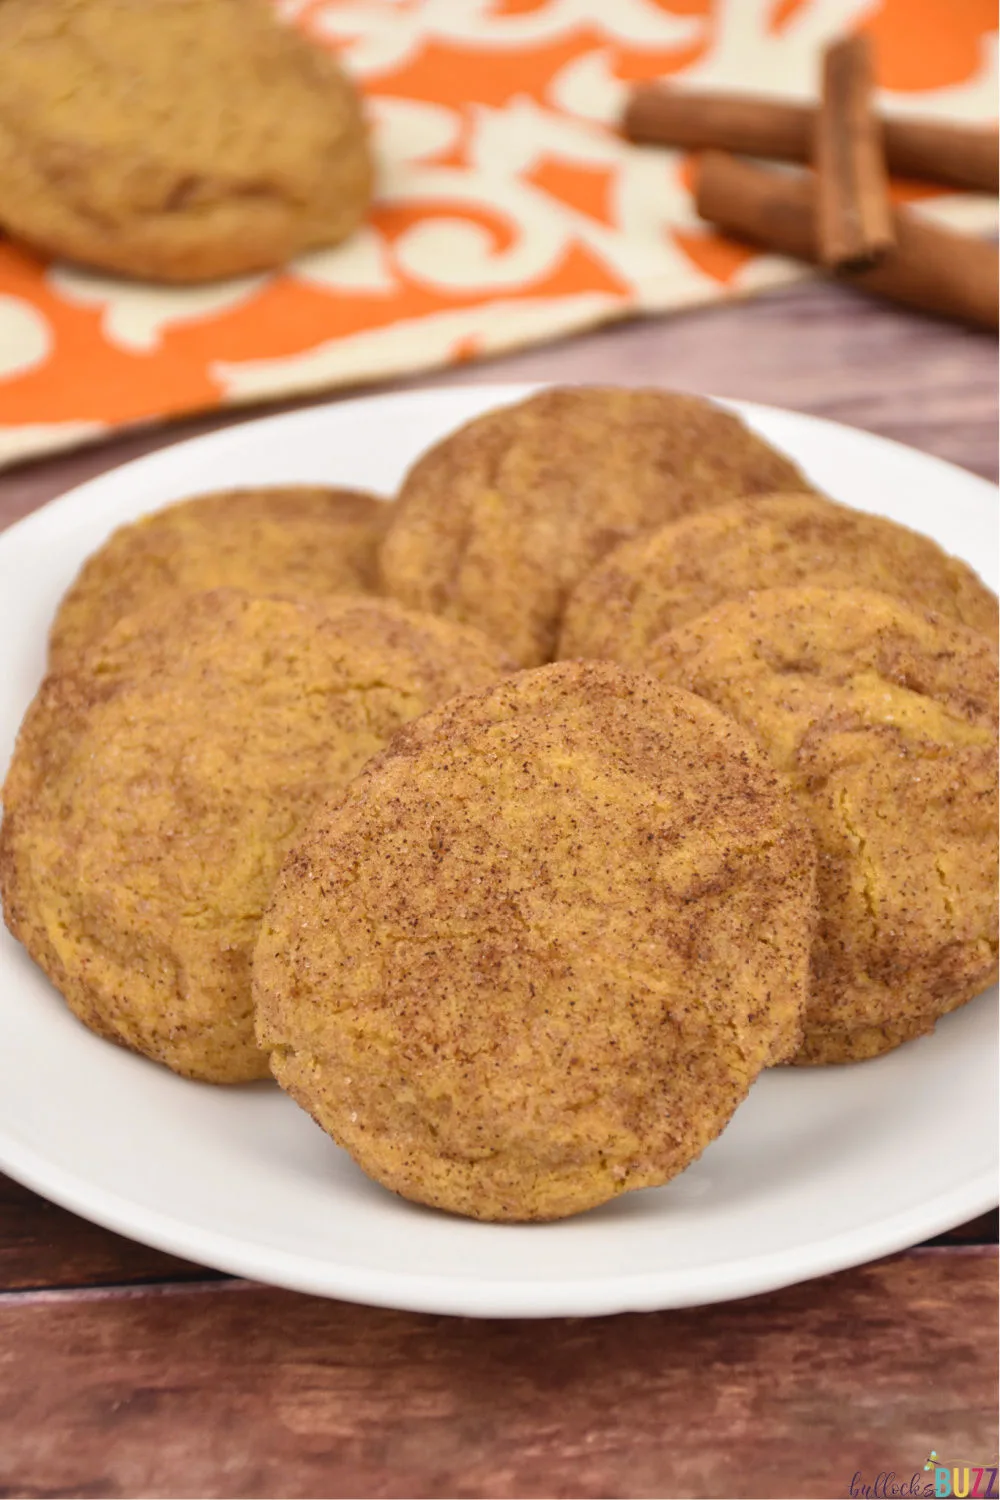 These Pumpkin Snickerdoodle Cookies are soft, chewy, and absolutely packed with delicious flavor! #recipe #snickerdoodles